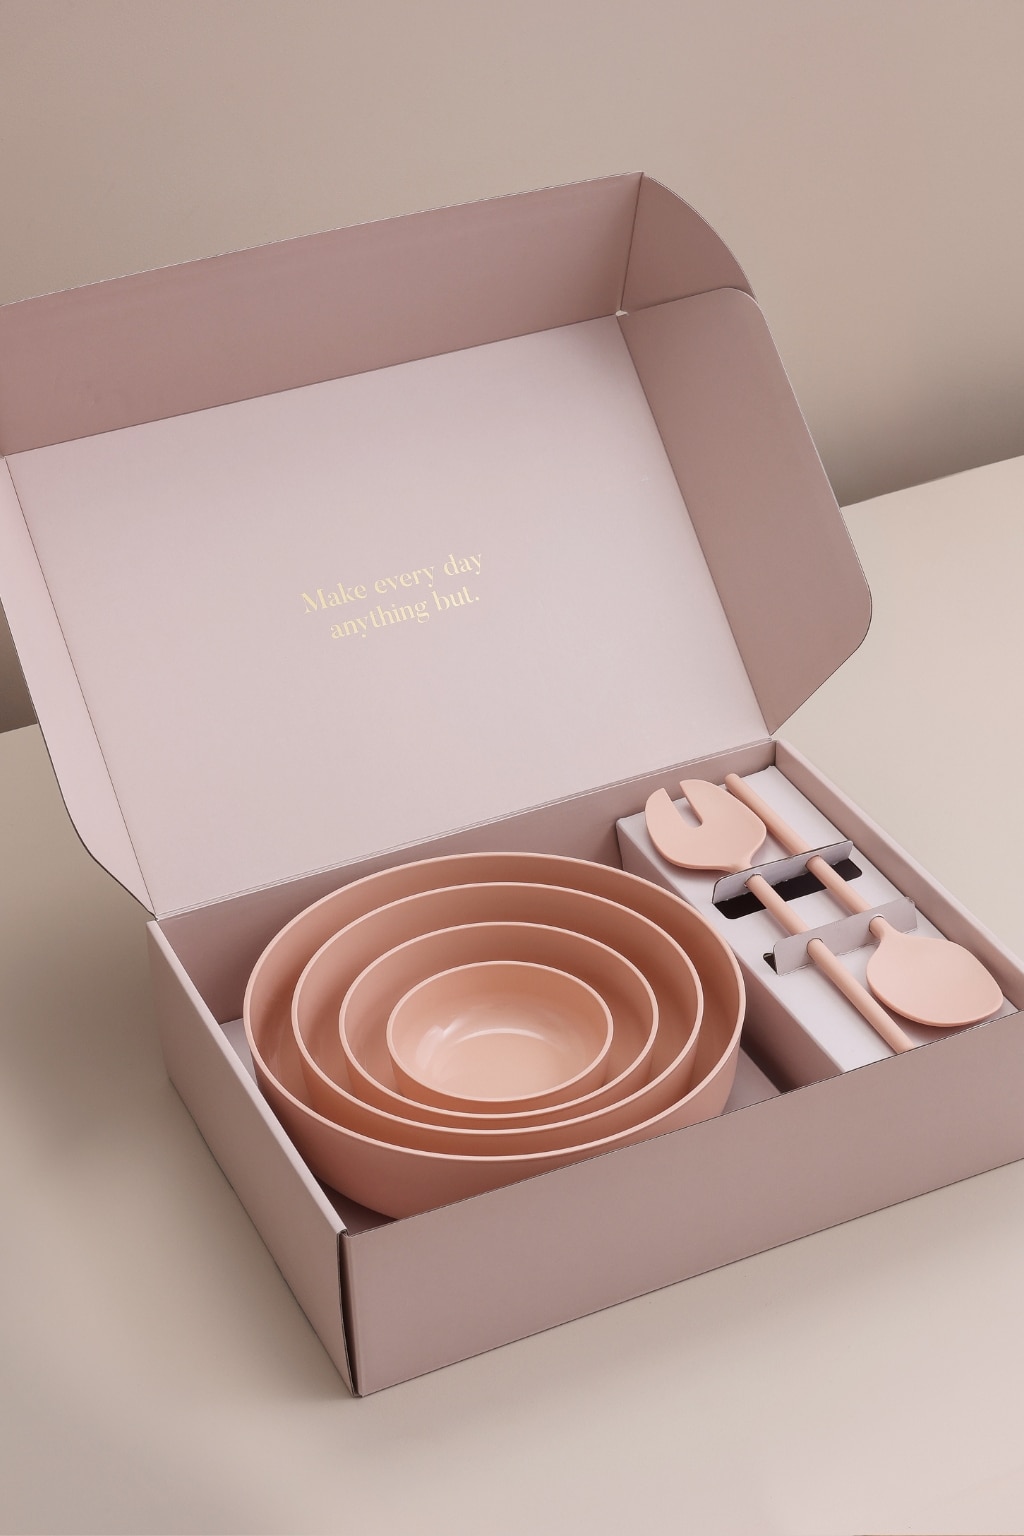 Ultimate Gift Pack in Blush. Contains best selling Blush 4-piece Nesting Bowl Set + matching salad servers, all packaged up in festive luxe gift box. Christmas shopping sorted.